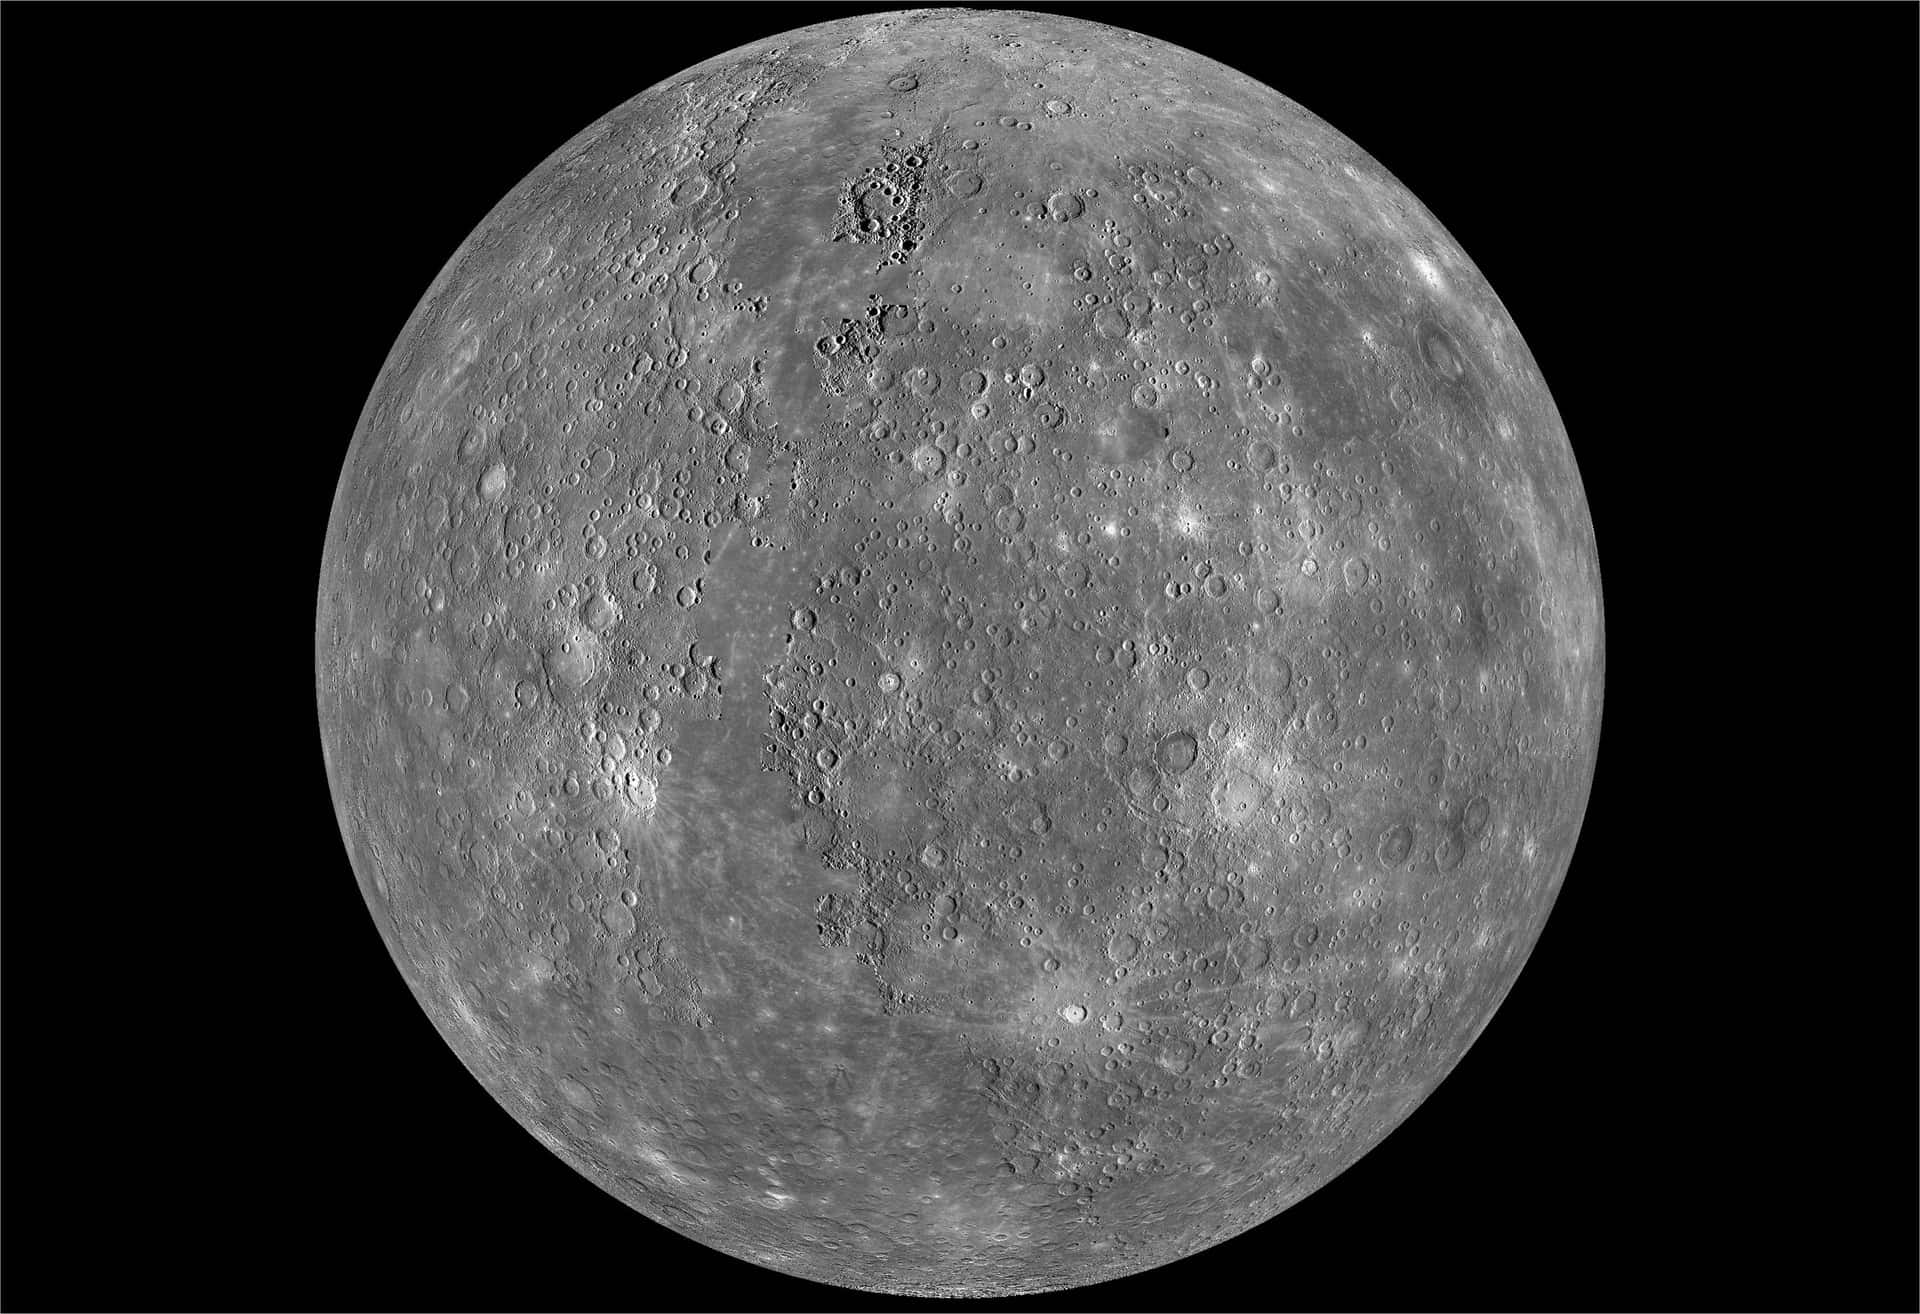 A photograph of the planet Mercury in space